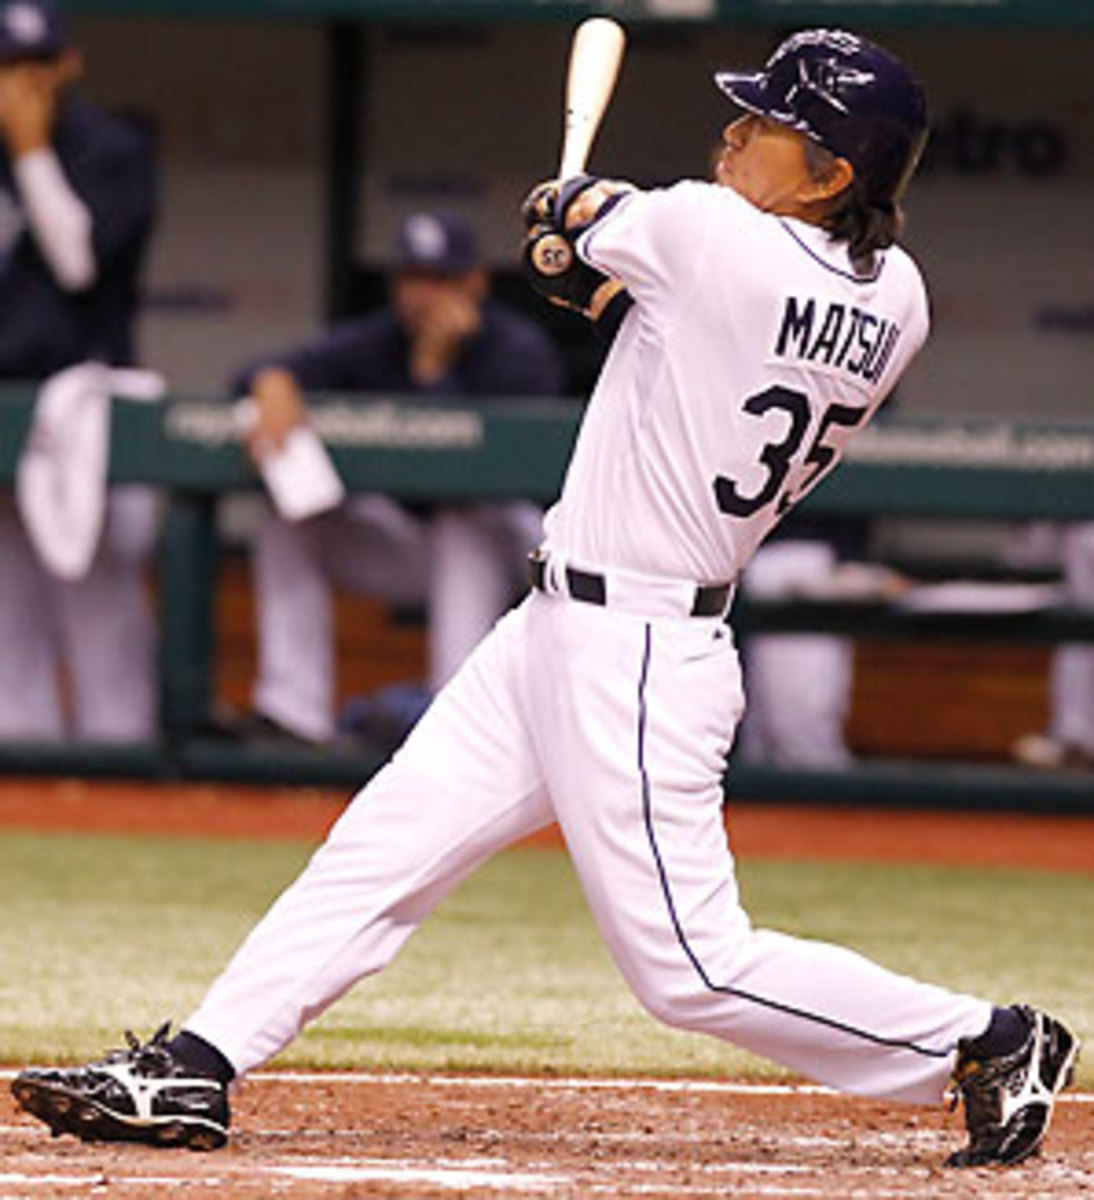 Can aging stars like Matsui still help? - Sports Illustrated